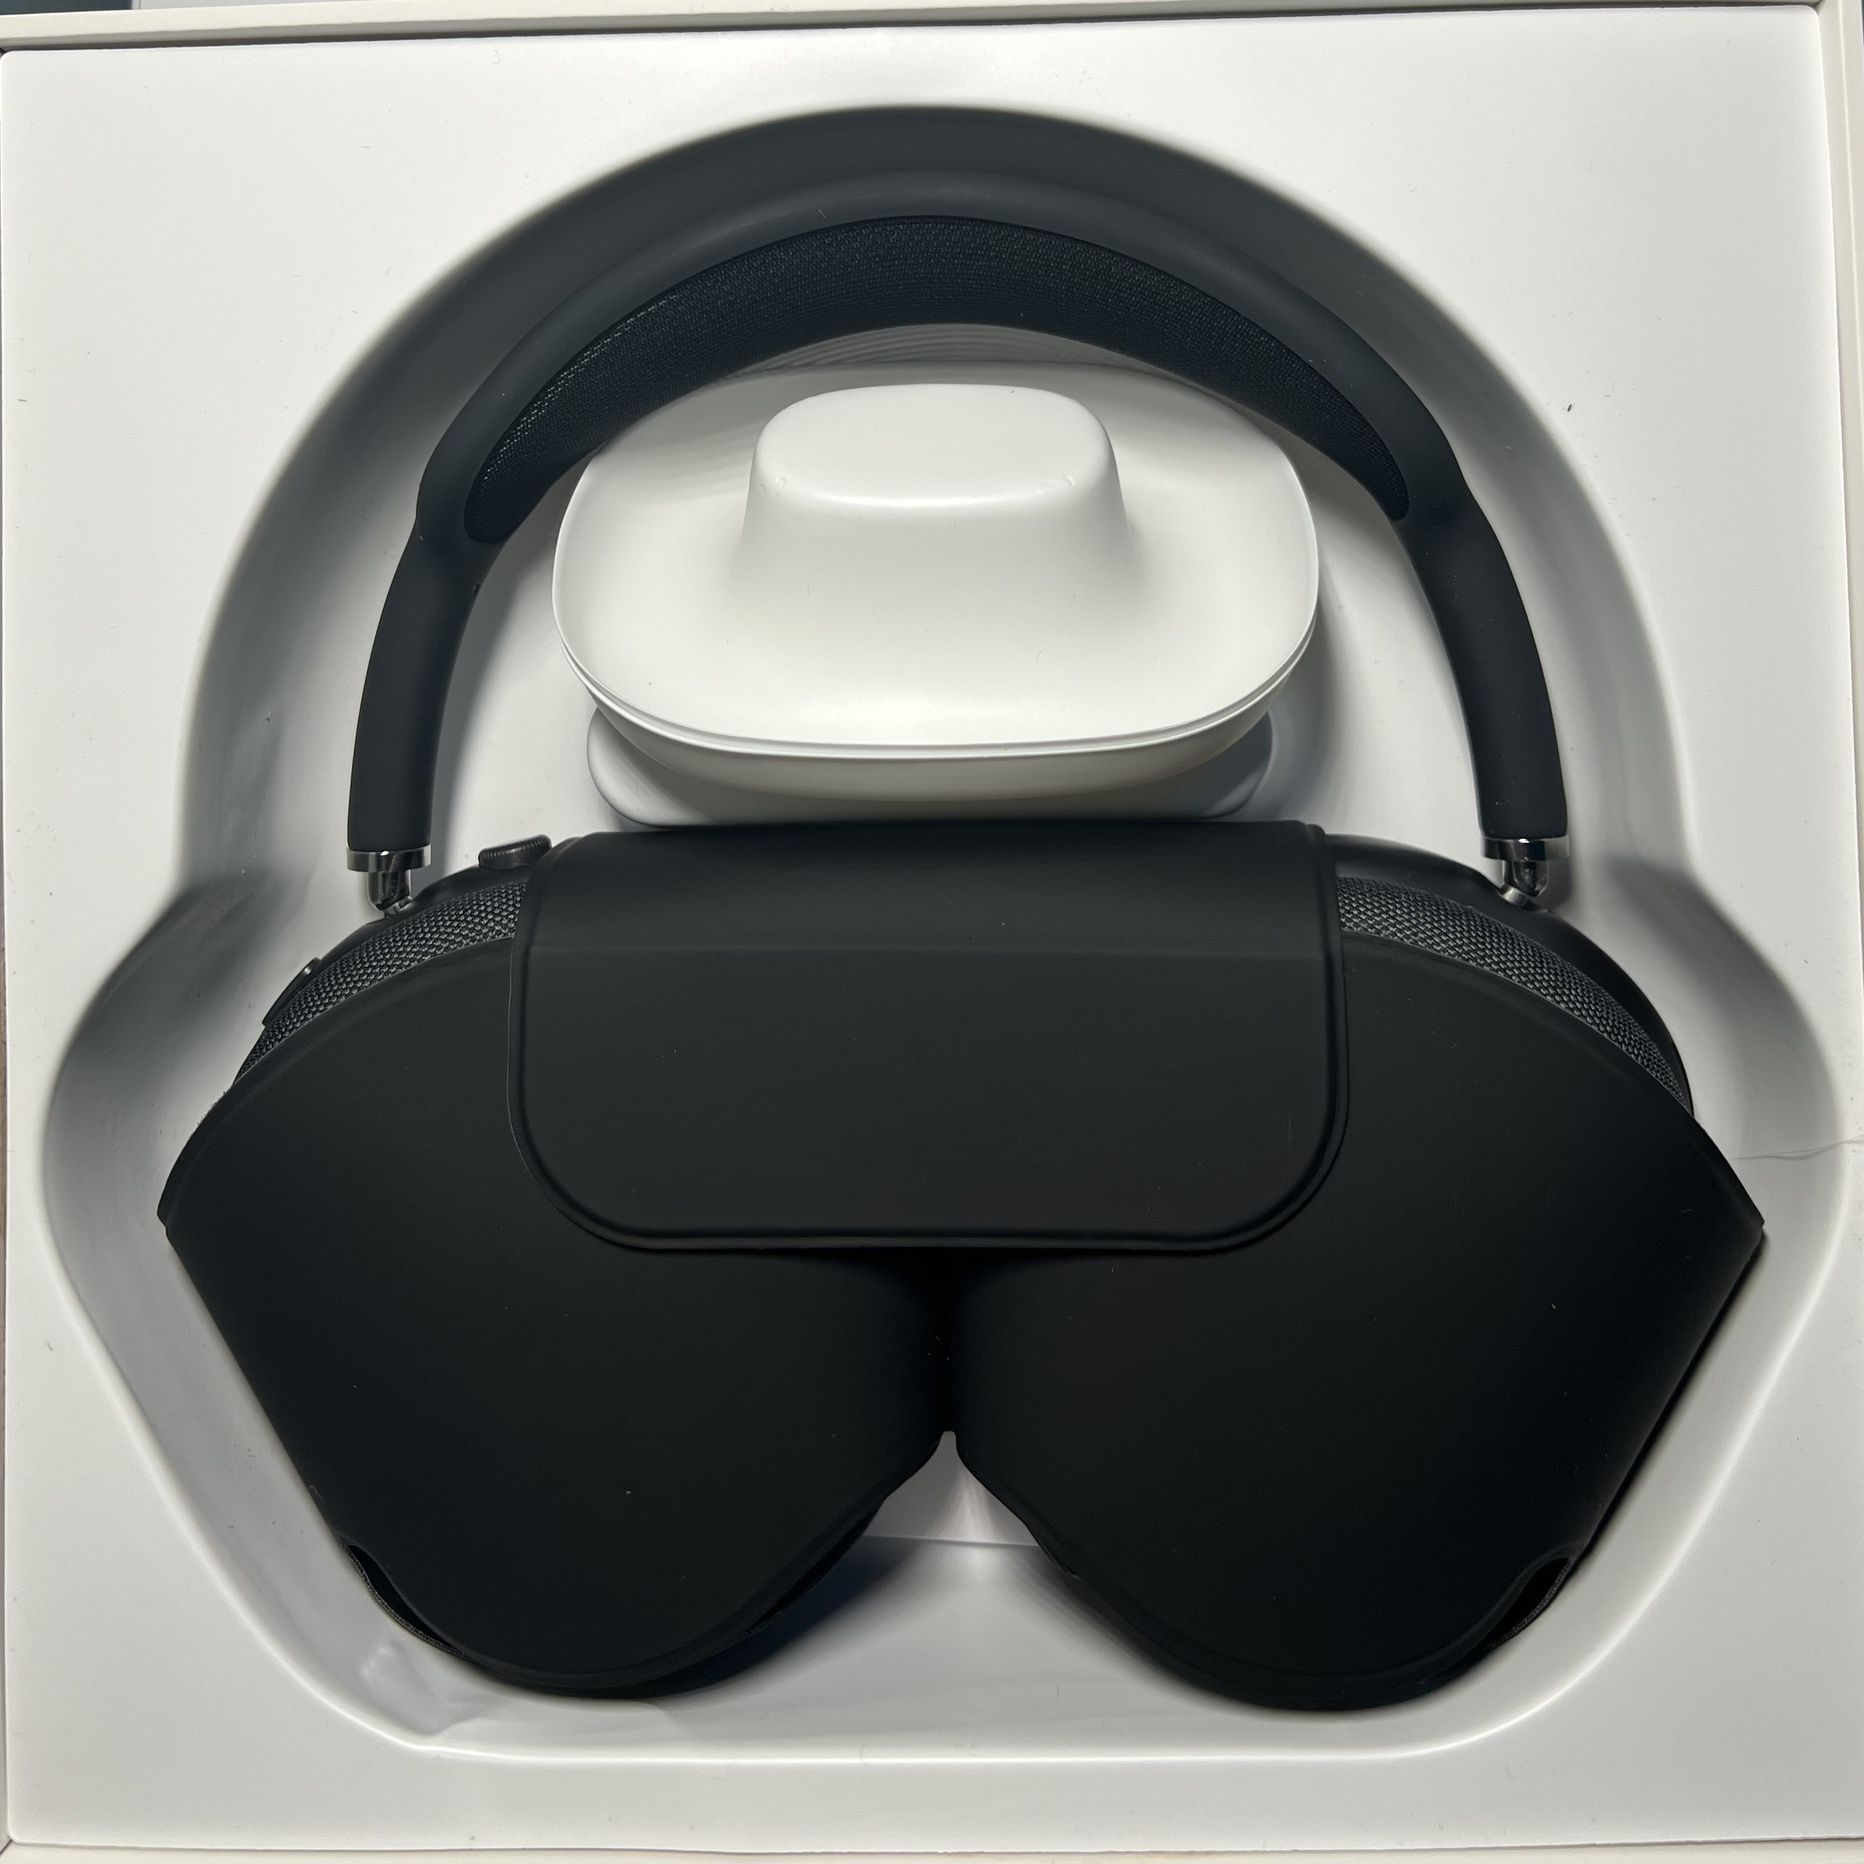 *BEST OFFER* Apple AirPod Max